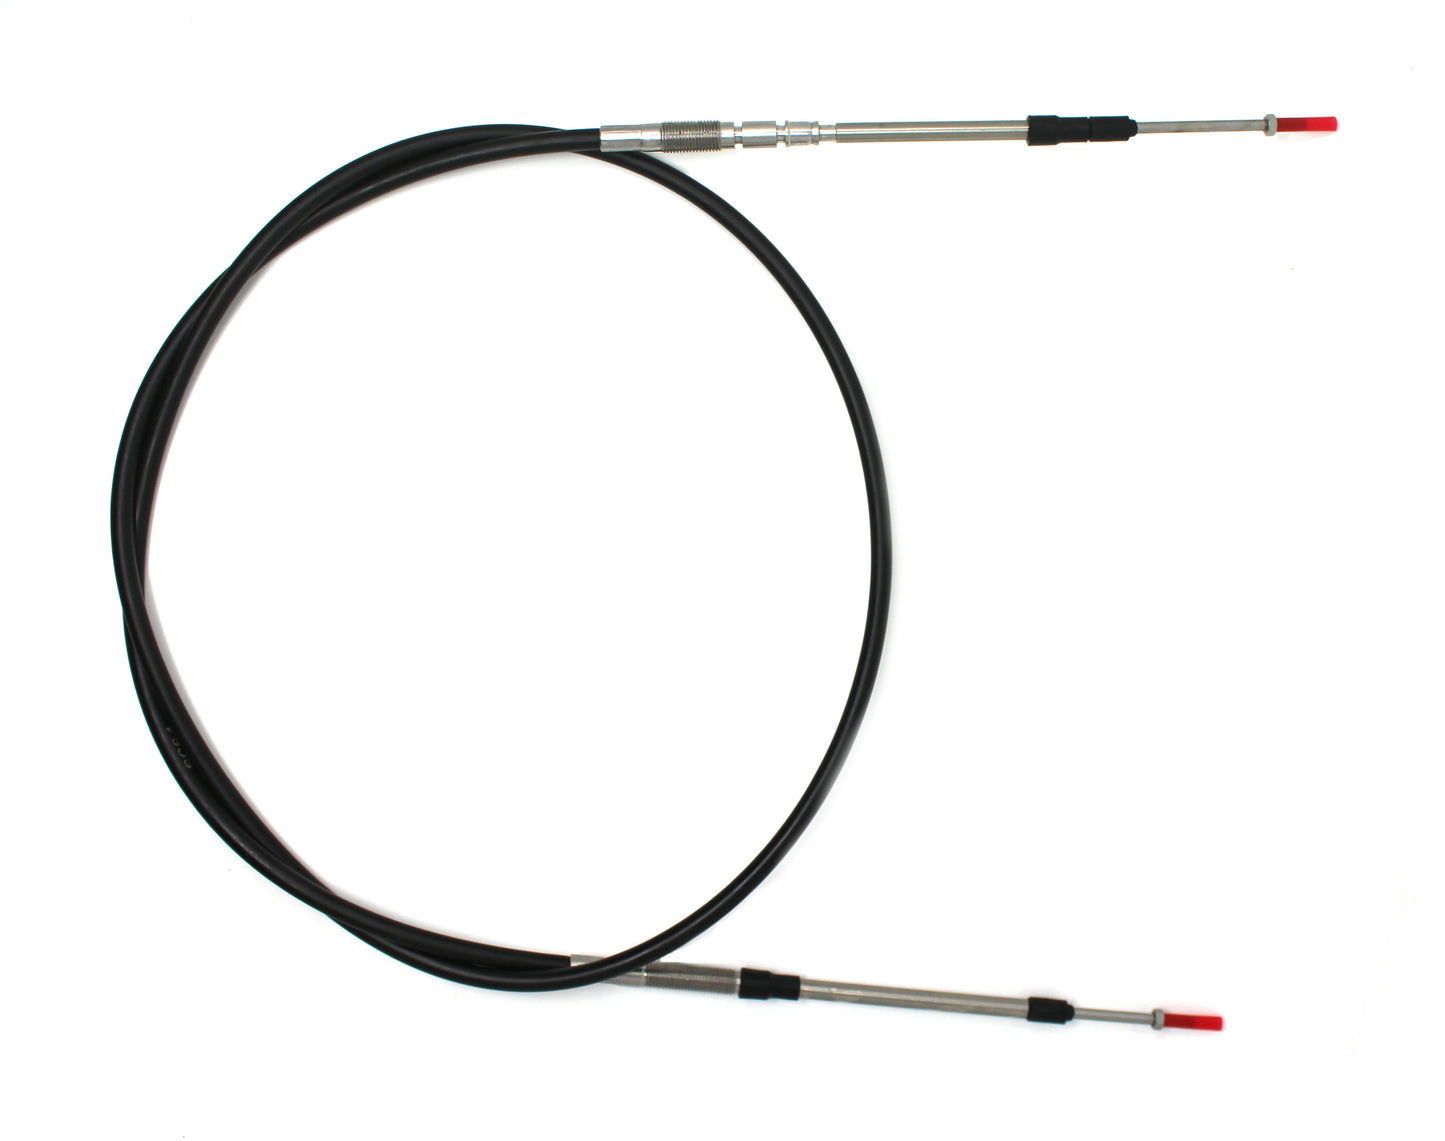 Aftermarket Steering Cable Replacement for Seadoo GTX DI/GTX 4TEC/155/215 RXT 277001578, 277001326, 277001438, 277001555, 277000949, SBT# 26-3129, WSM# 002-046-05 JSP Brand